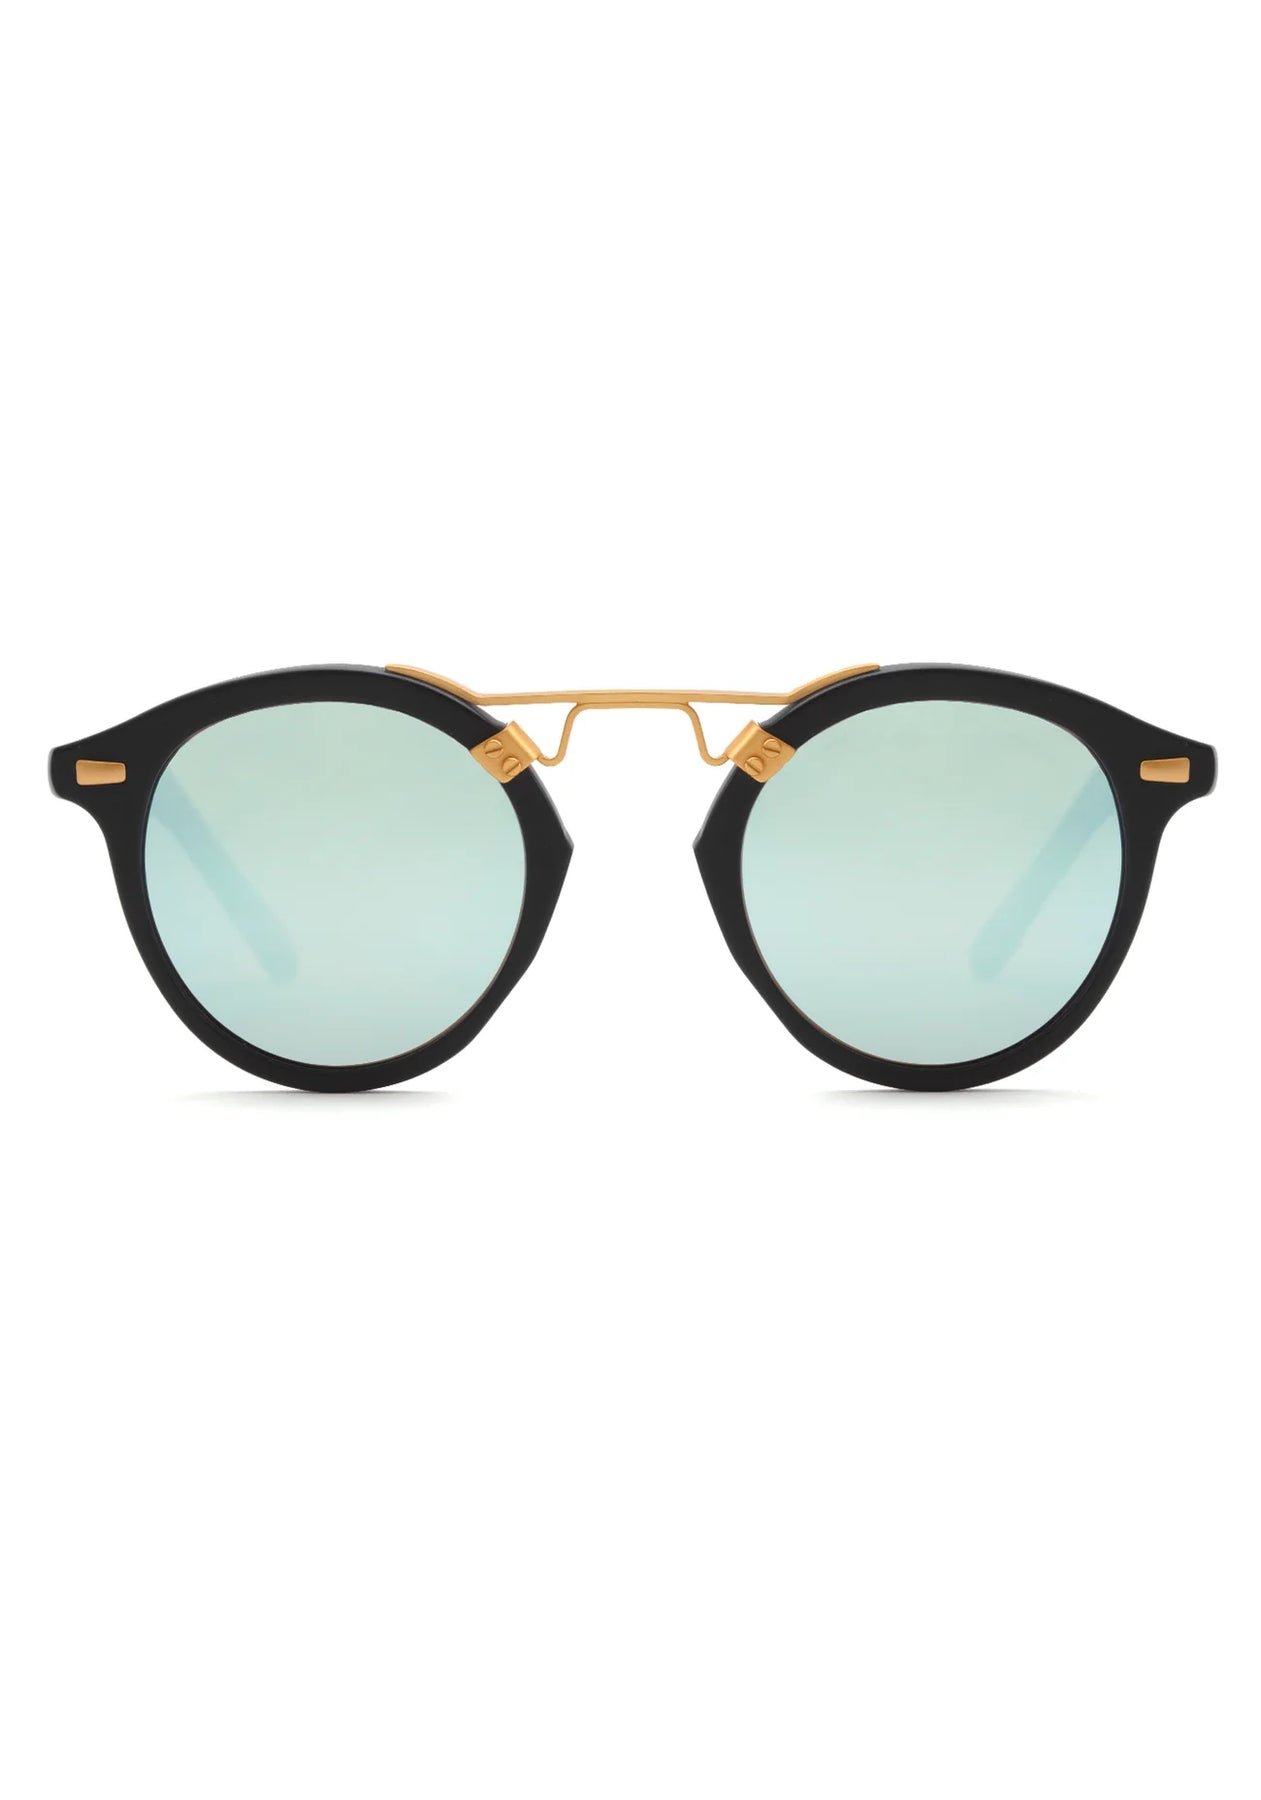 St. Louis Polarized Sunglasses in Oyster to Black